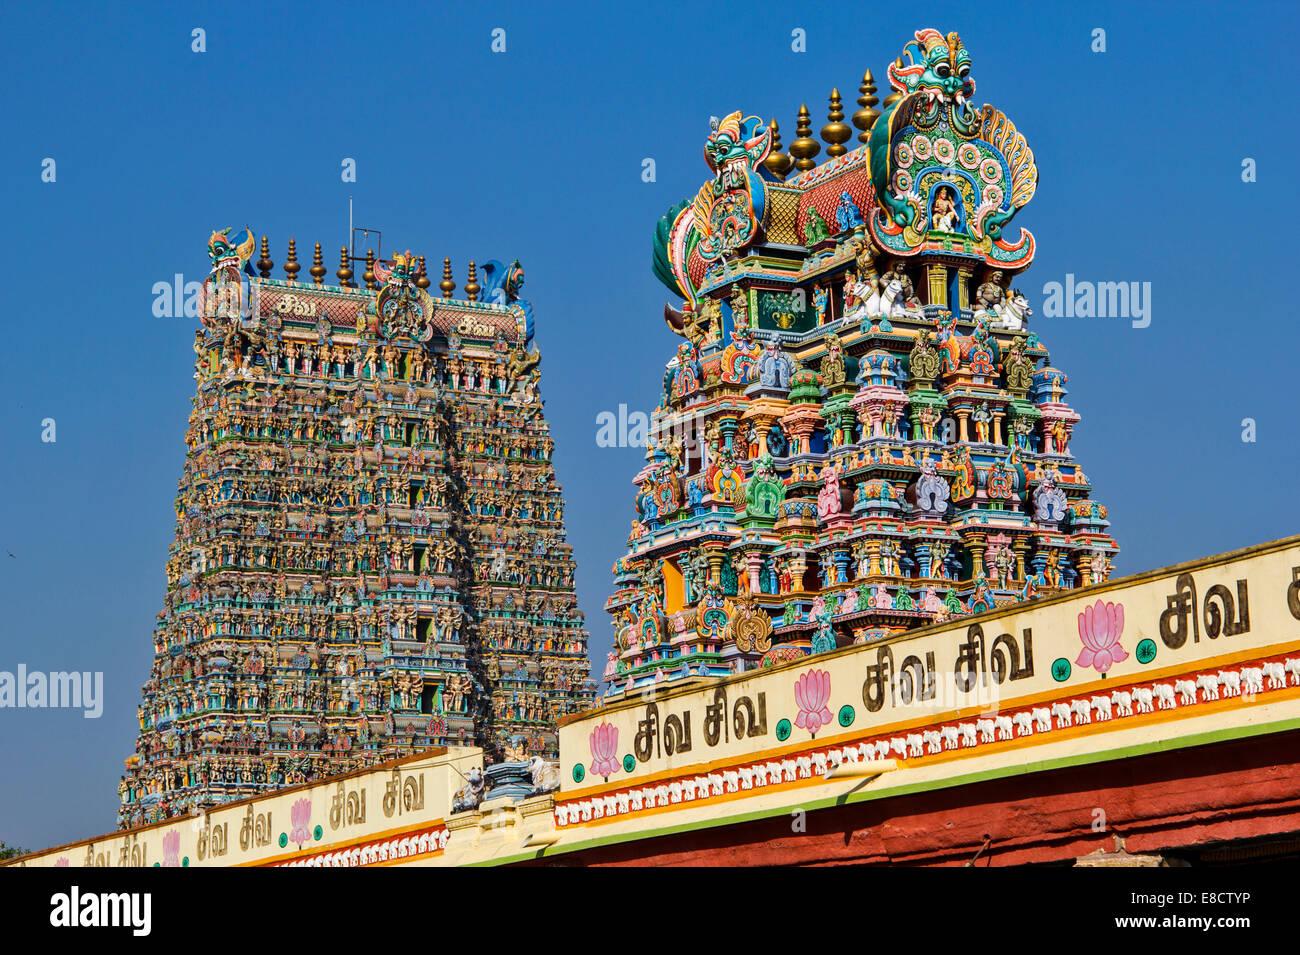 MEENAKSHI AMMAN TEMPLE MADURAI INDIA TWO OF THE HIGHLY DECORATED